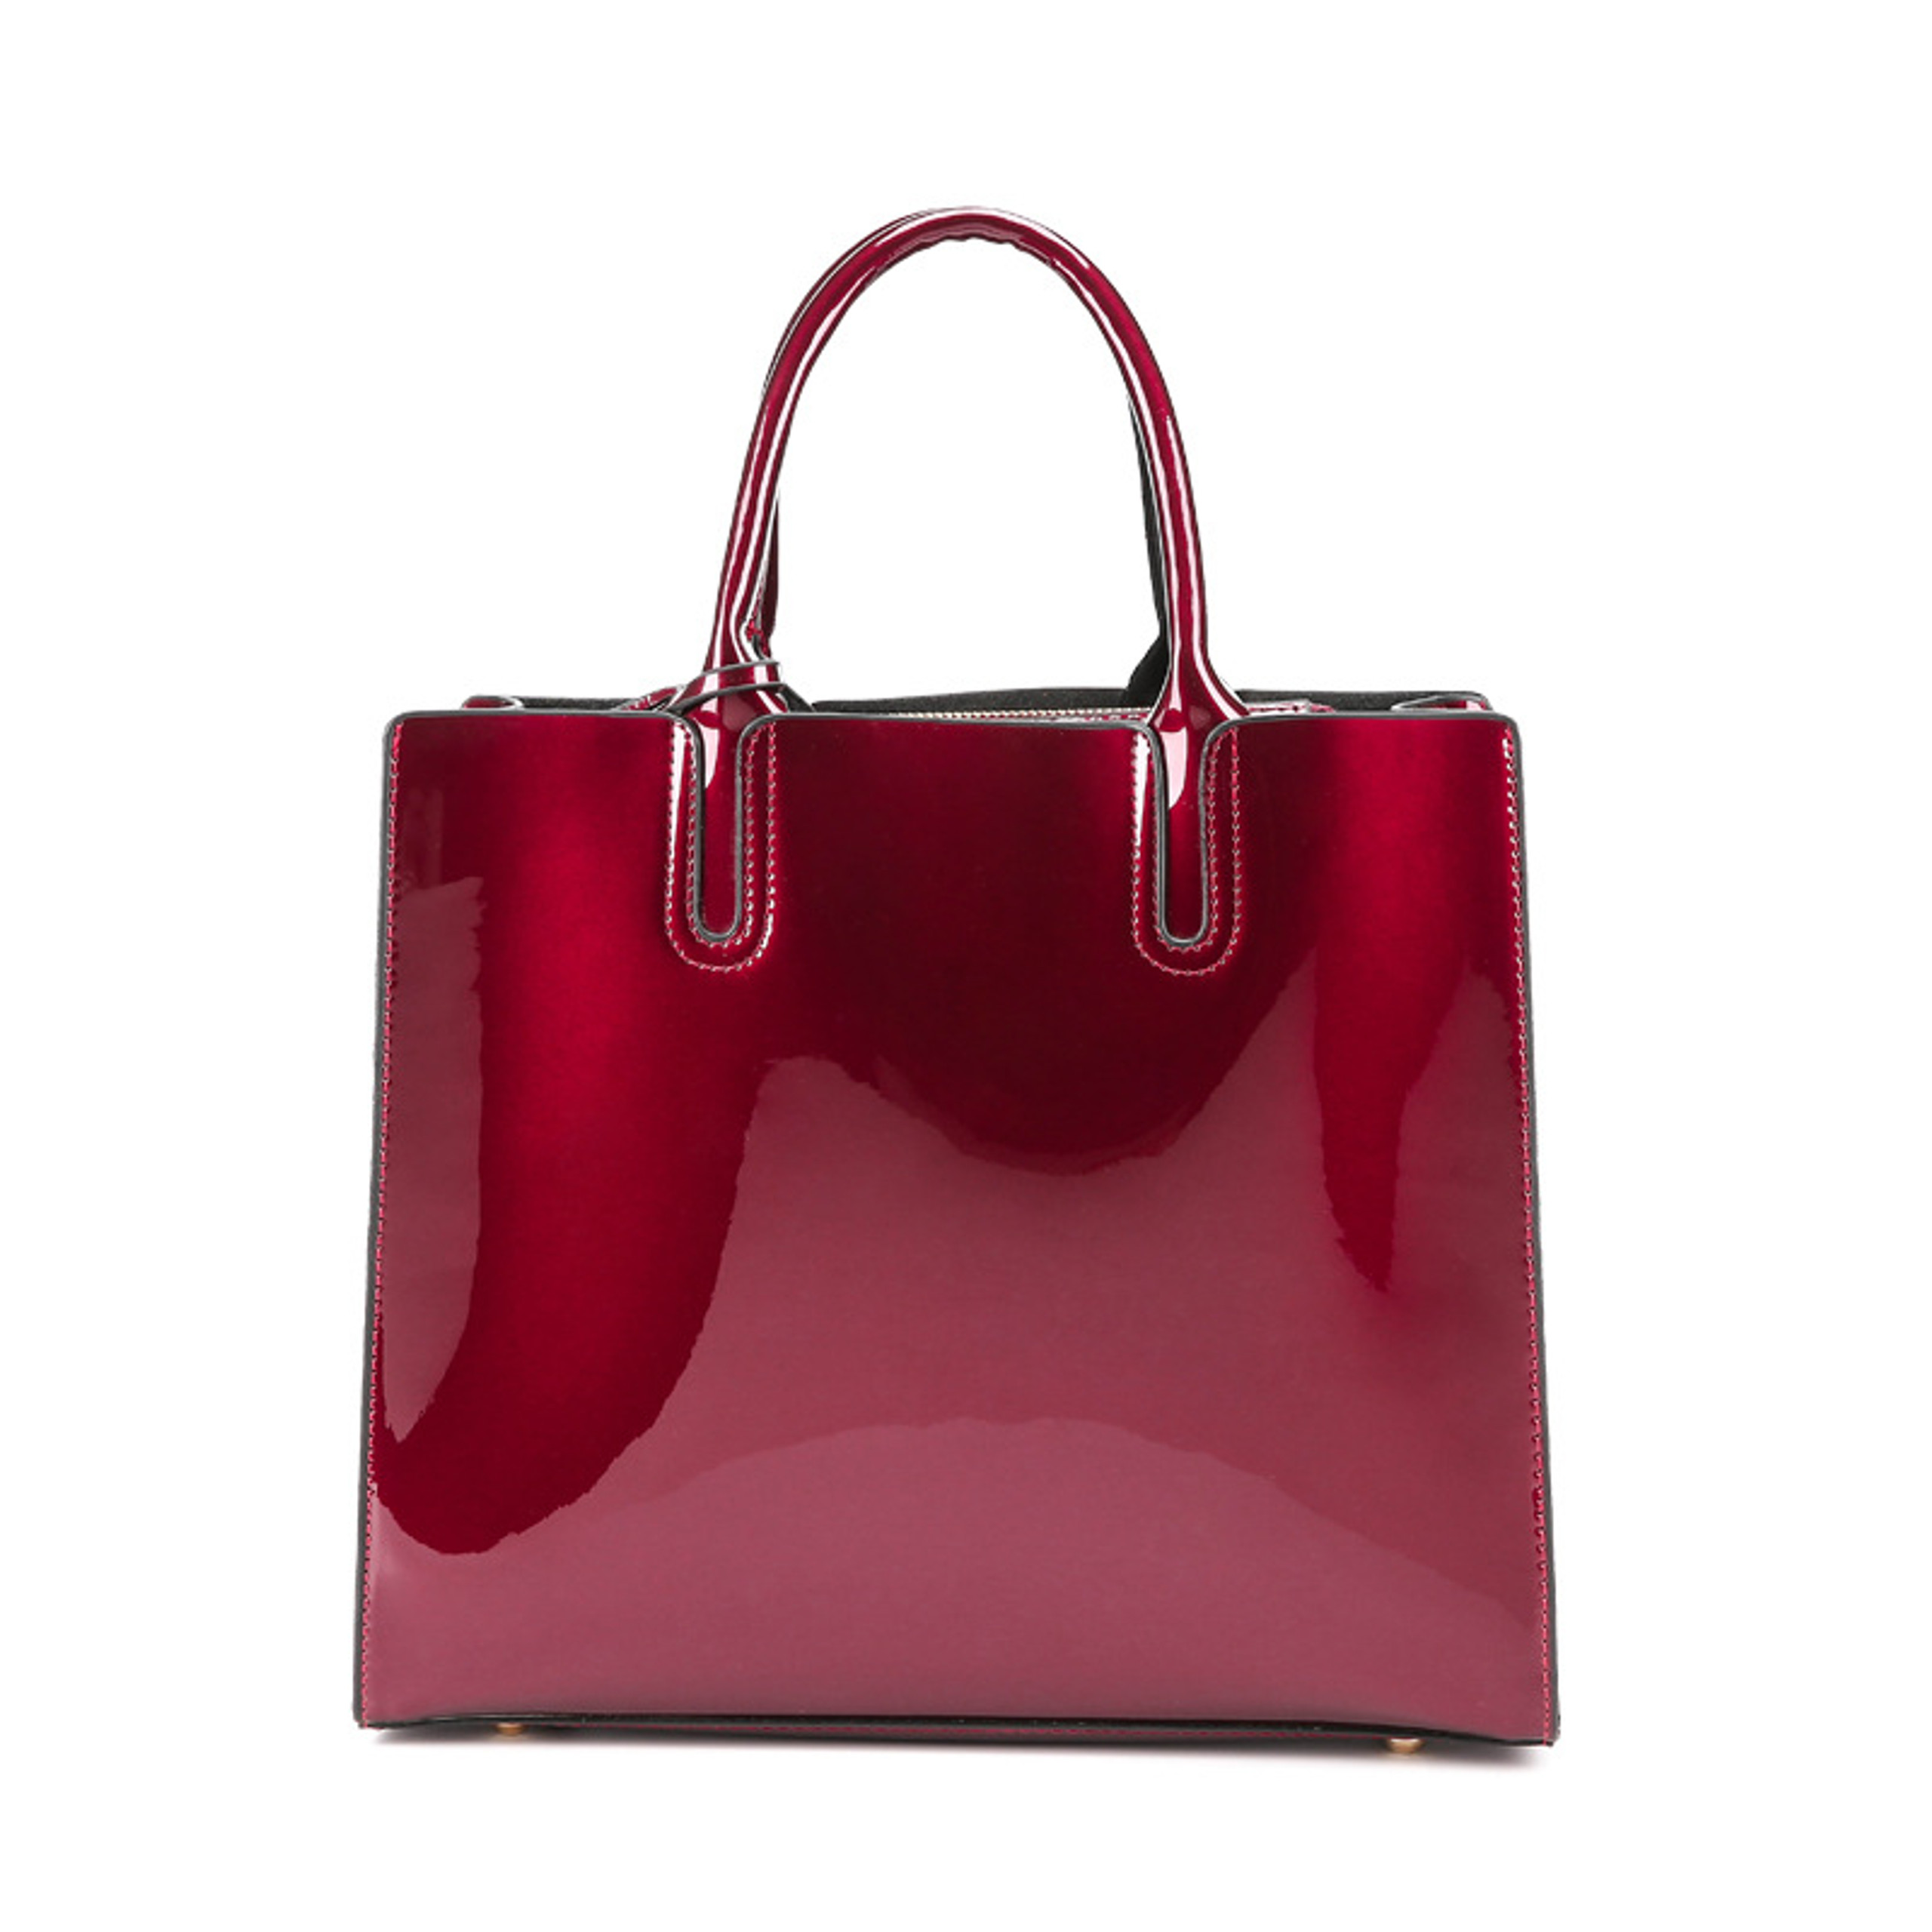 Bonsacchic Red Patent Leather Tote Bag Handbags Women Famous Brands ...